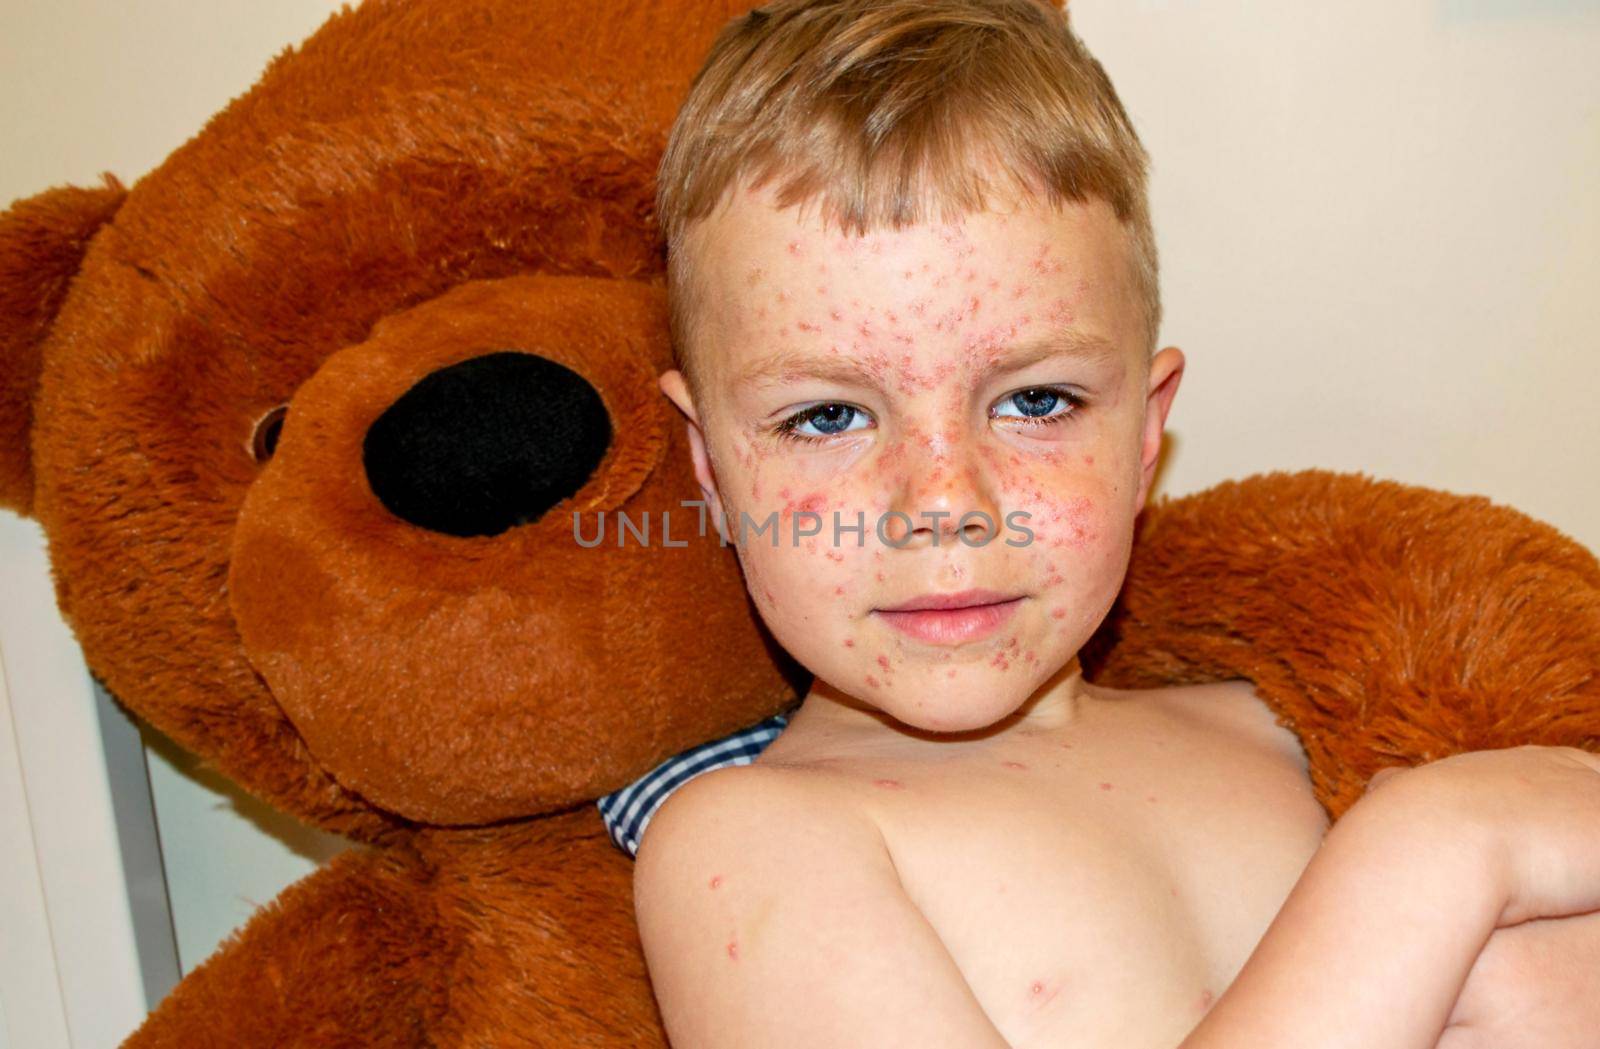 Natural vaccination. Contagious disease. Sick boy chickenpox with toy bear. Varicella virus or Chickenpox bubble rash on child body and face. High quality photo